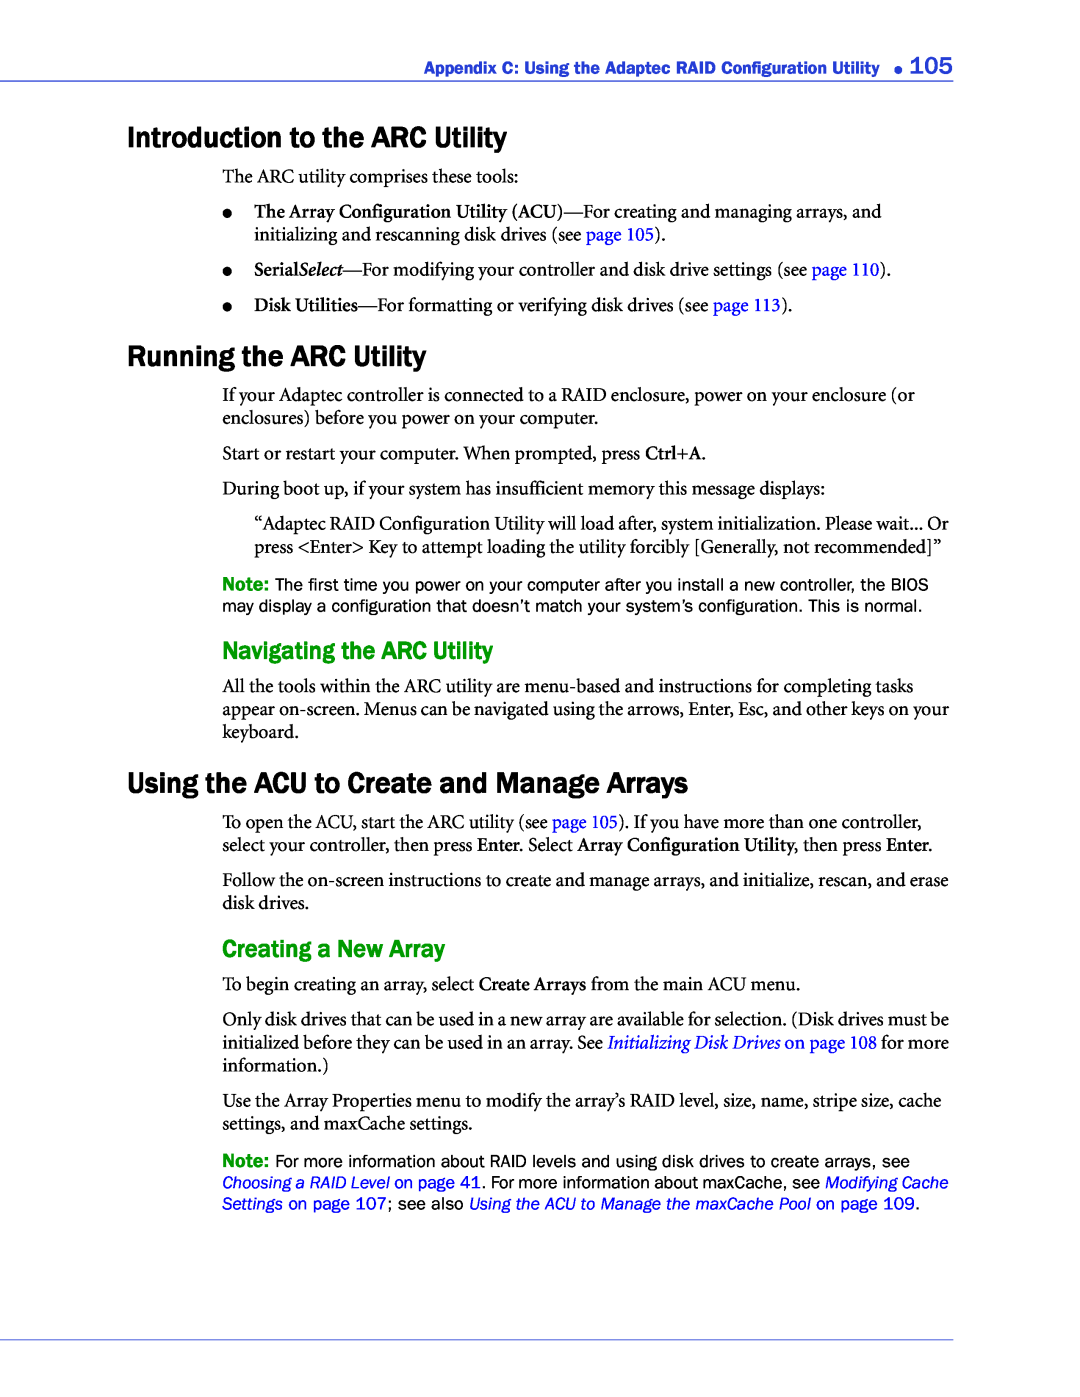 Adaptec 2268300R manual Introduction to the ARC Utility, Running the ARC Utility, Using the ACU to Create and Manage Arrays 